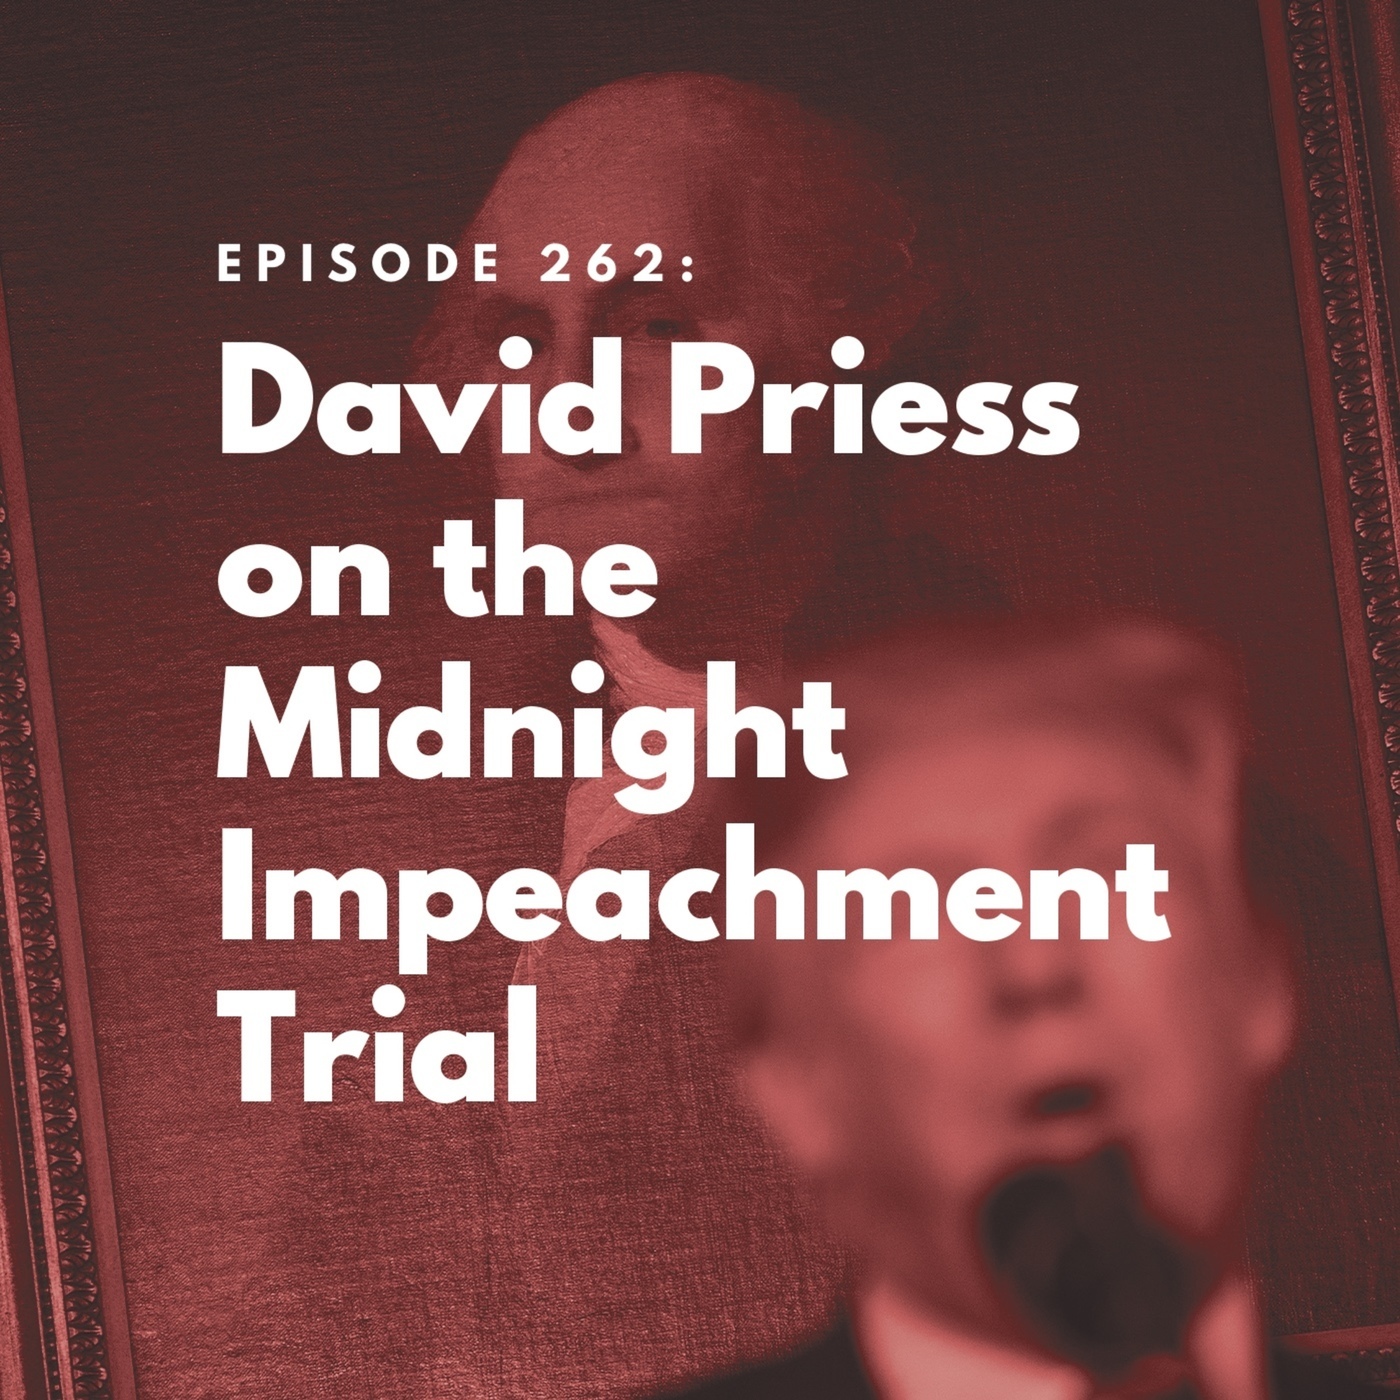 how to get rid of a president by david priess